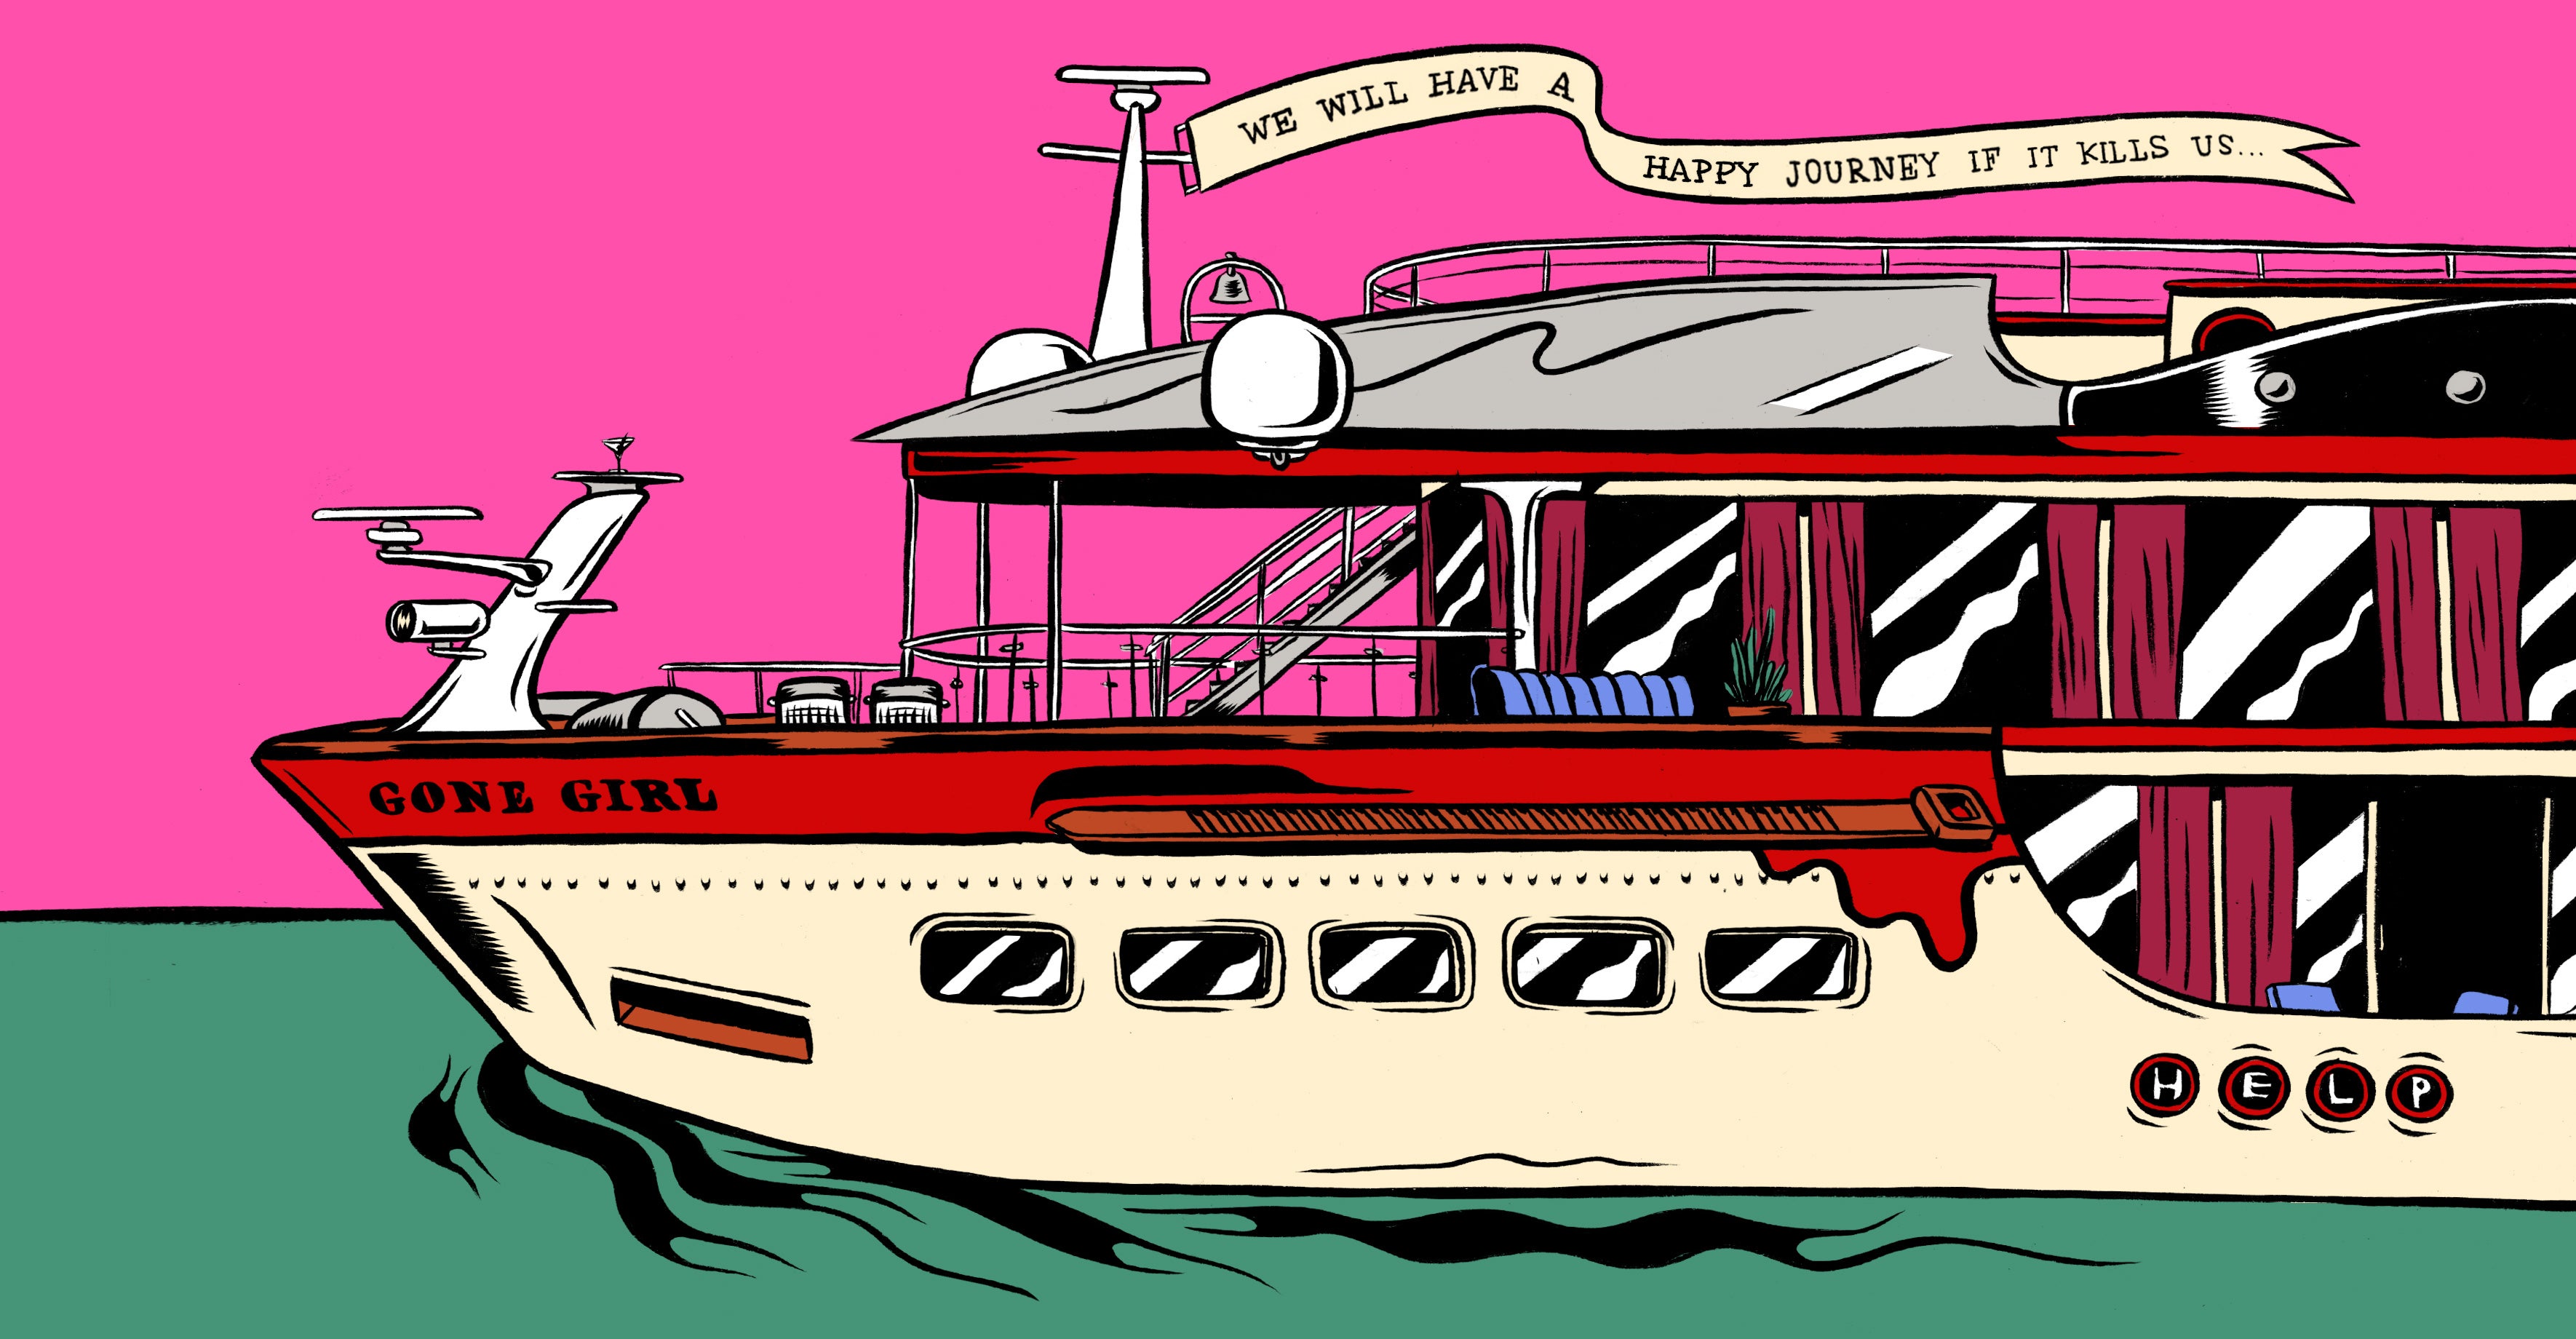 A cartoon drawing of a river cruise ship that says GONE GIRL on the hull. It is flying a flag that says, "We will have a happy journey if it kills us … ." Letters in portholes spell out HELP.